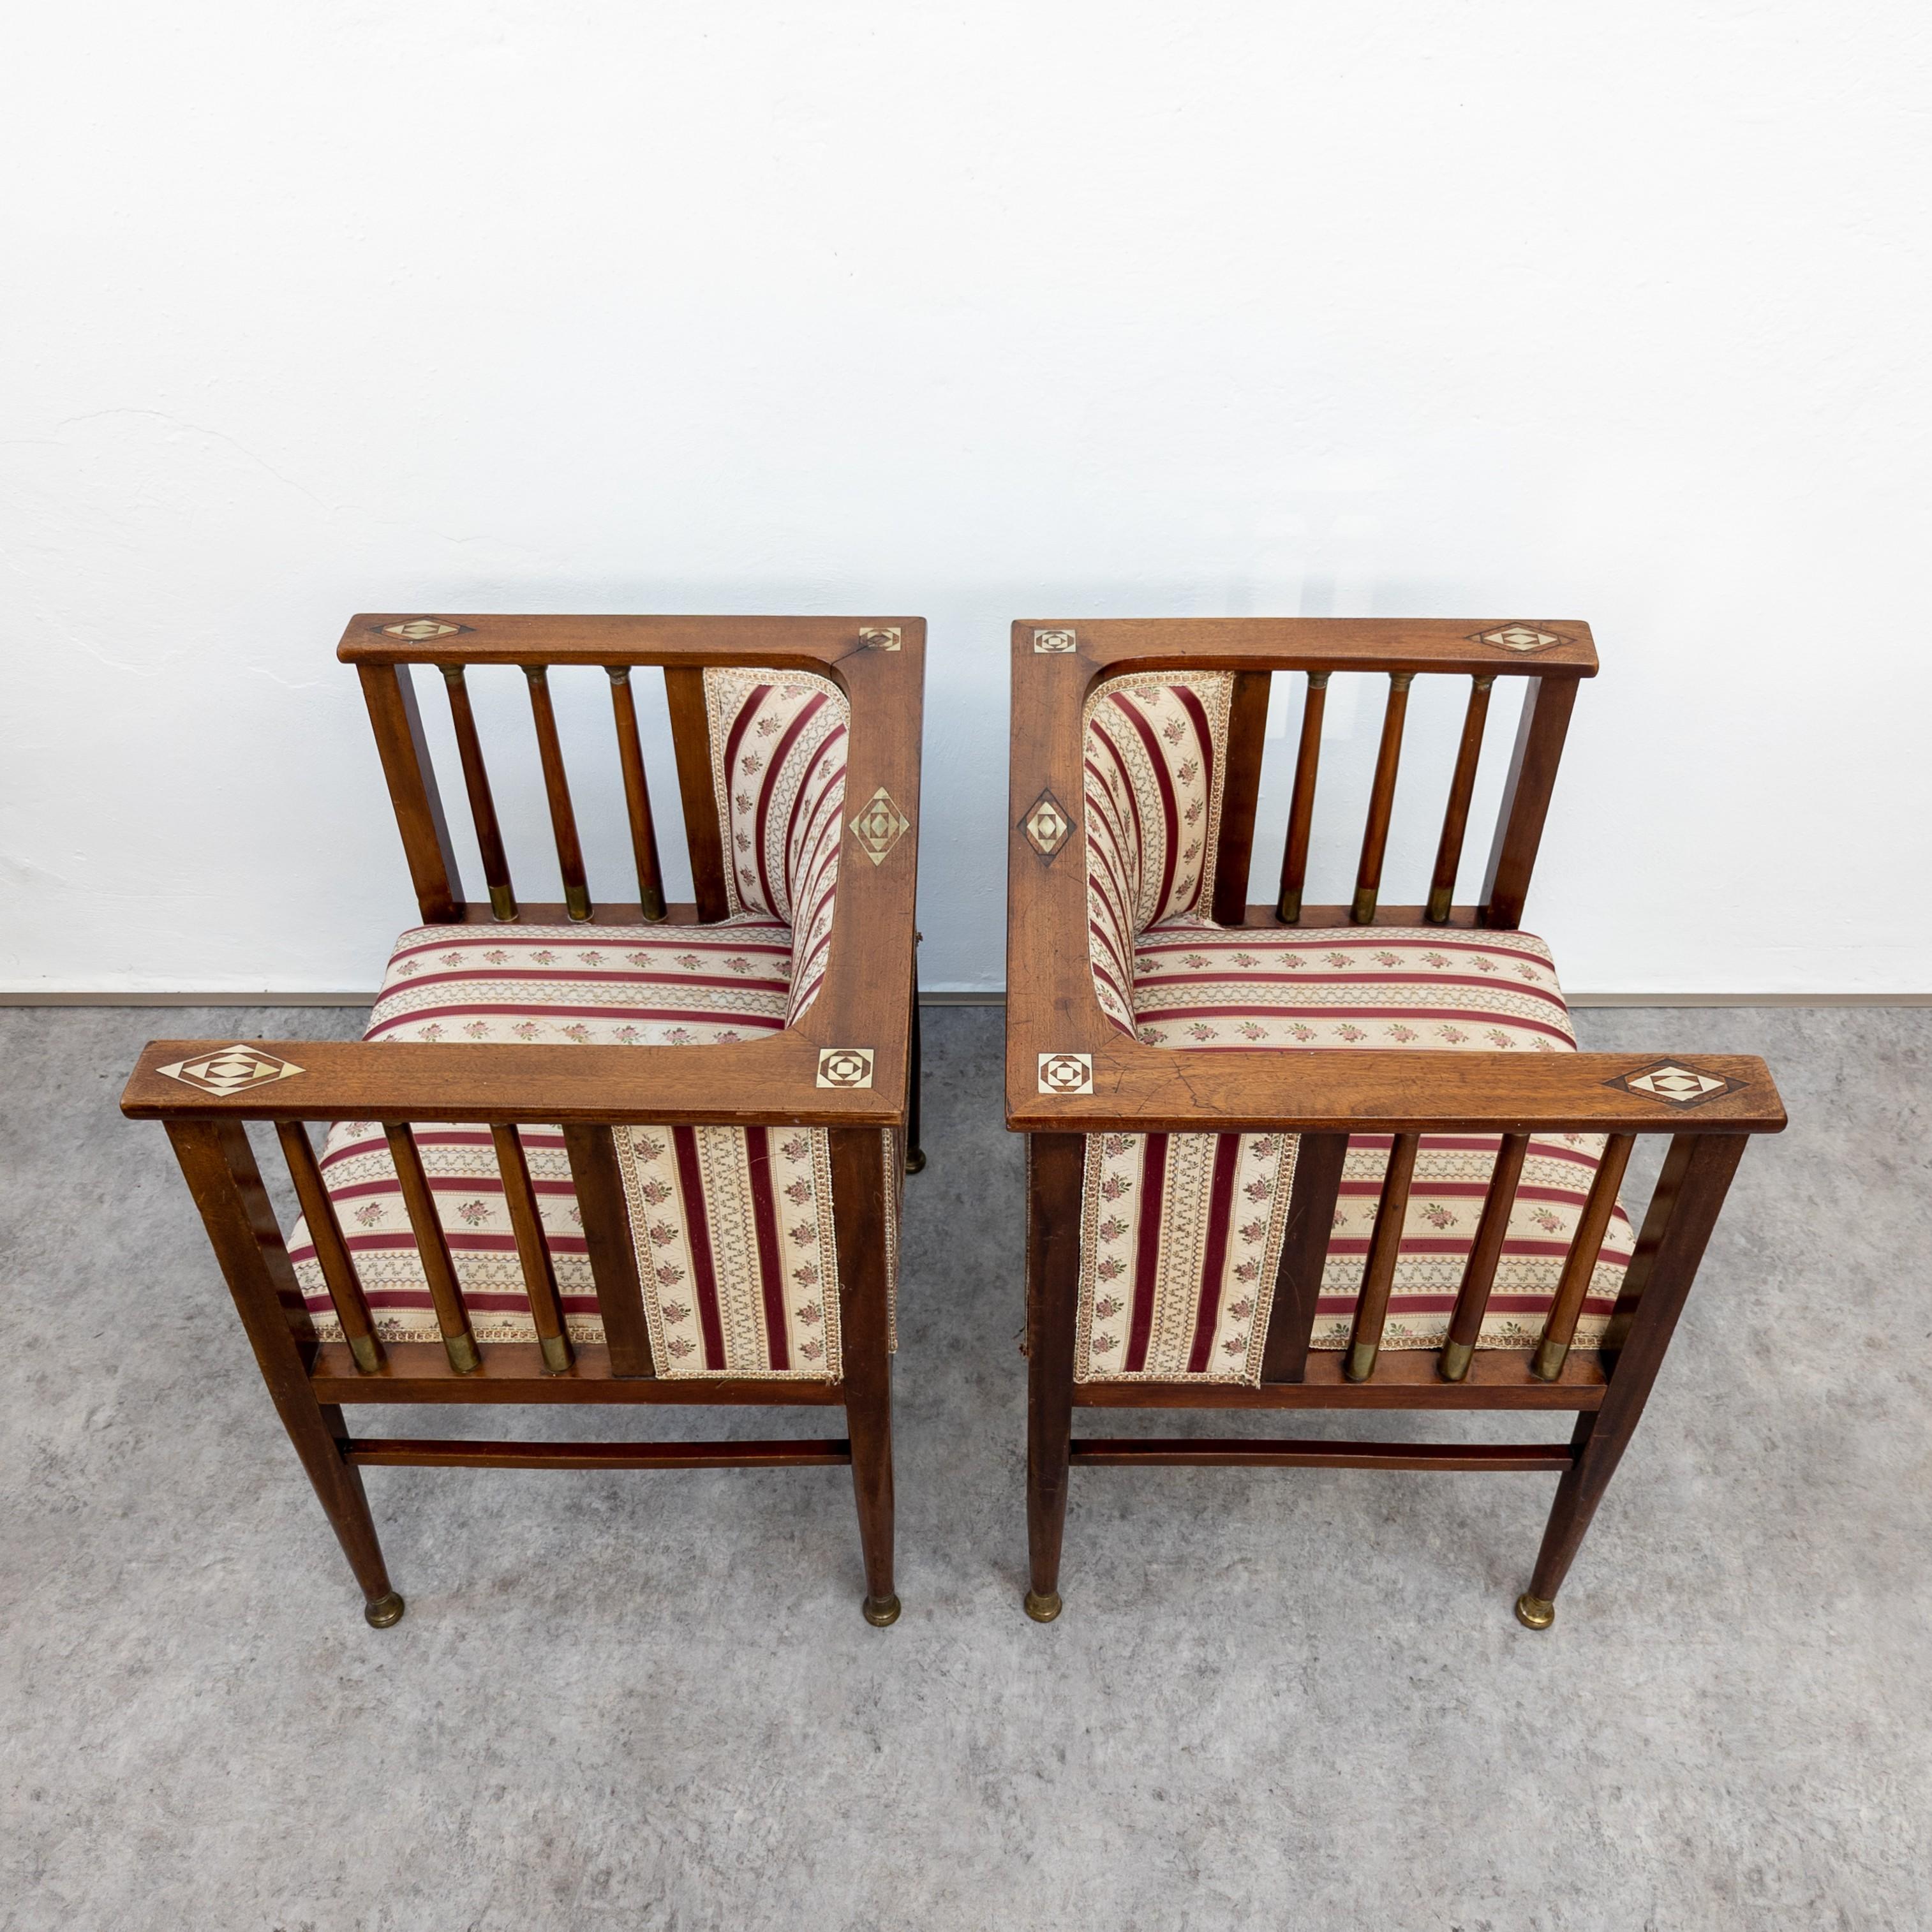 Very rare drawing room armchairs designed by German artist Hans Christiansen (1866-1945) around 1910s. Manufactured probably by Ludwig Schäfer, Mainz. Made of solid mahogany and mahogany veneer with metal inlays, brass fittings. In very good